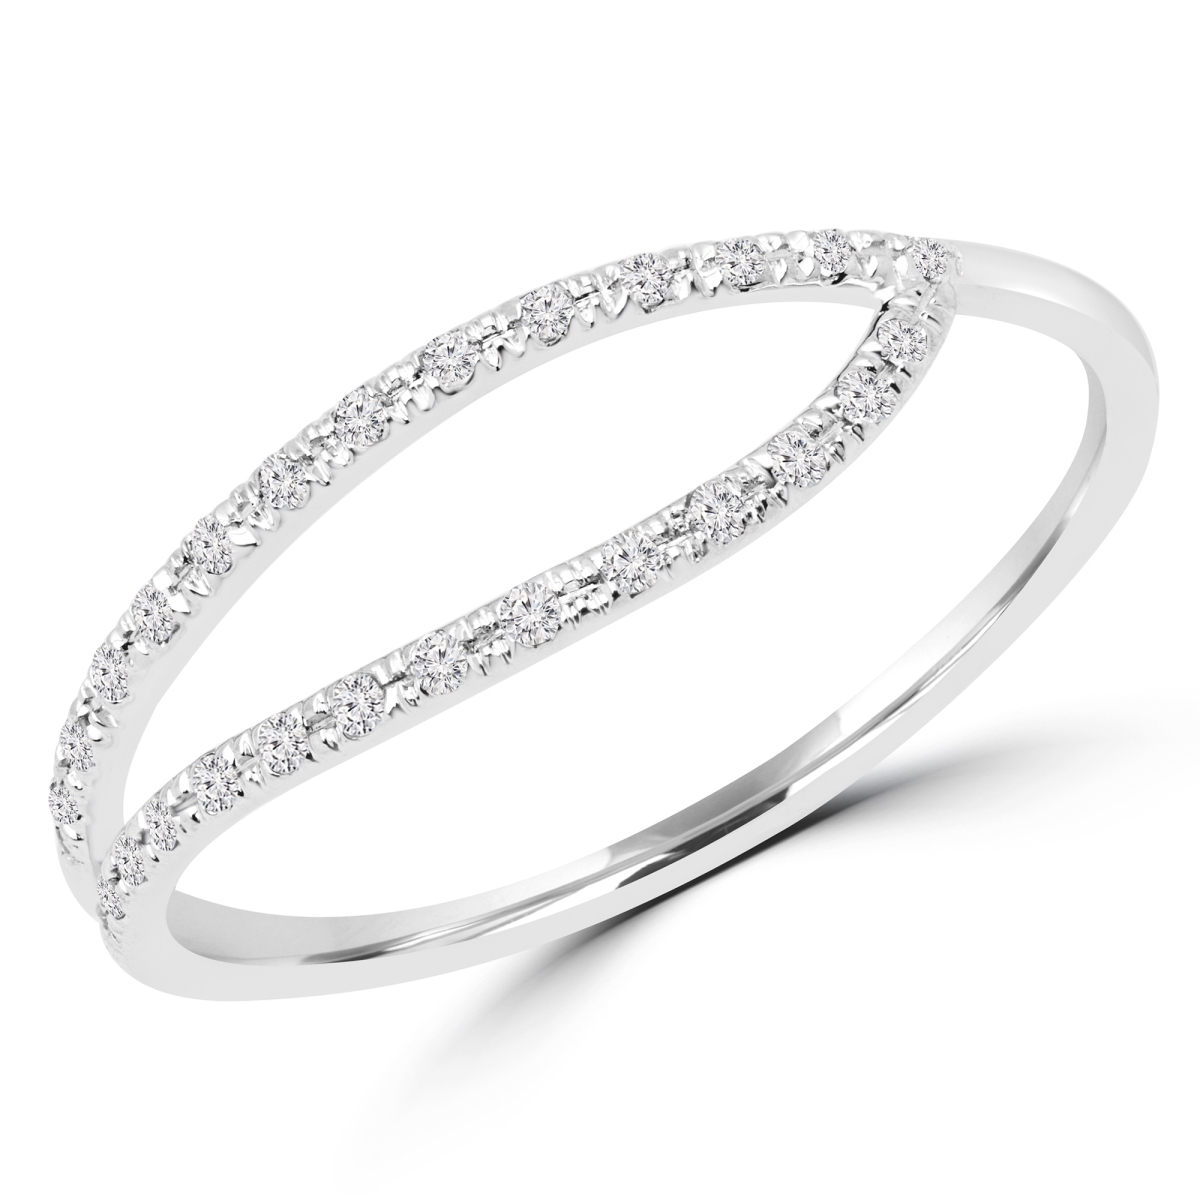 Picture of Majesty Diamonds MDR170056-3.25 0.1 CTW Round Diamond Cocktail Ring in 14K White Gold - Size 3.25